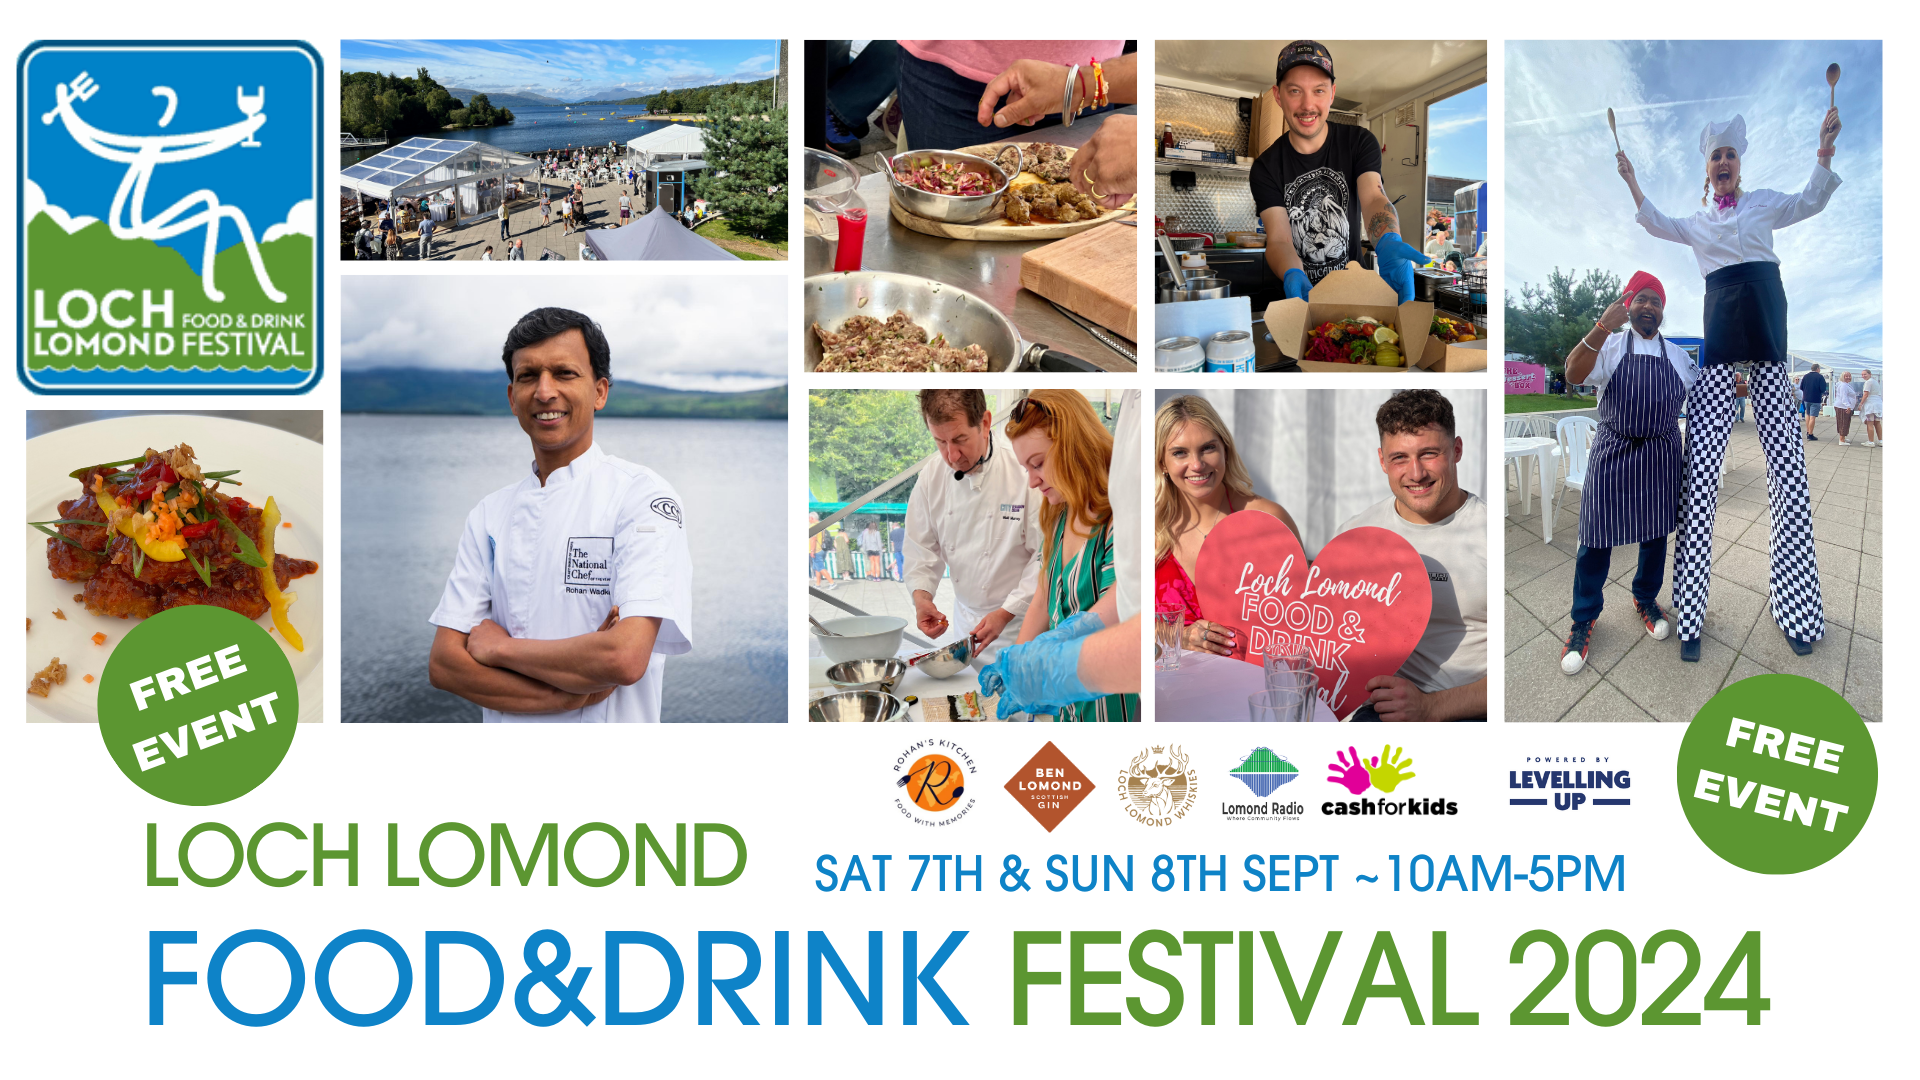 Loch Lomond Food & Drink Festival is COMING back IN 2024 - 7th & 8th Sept<br />
